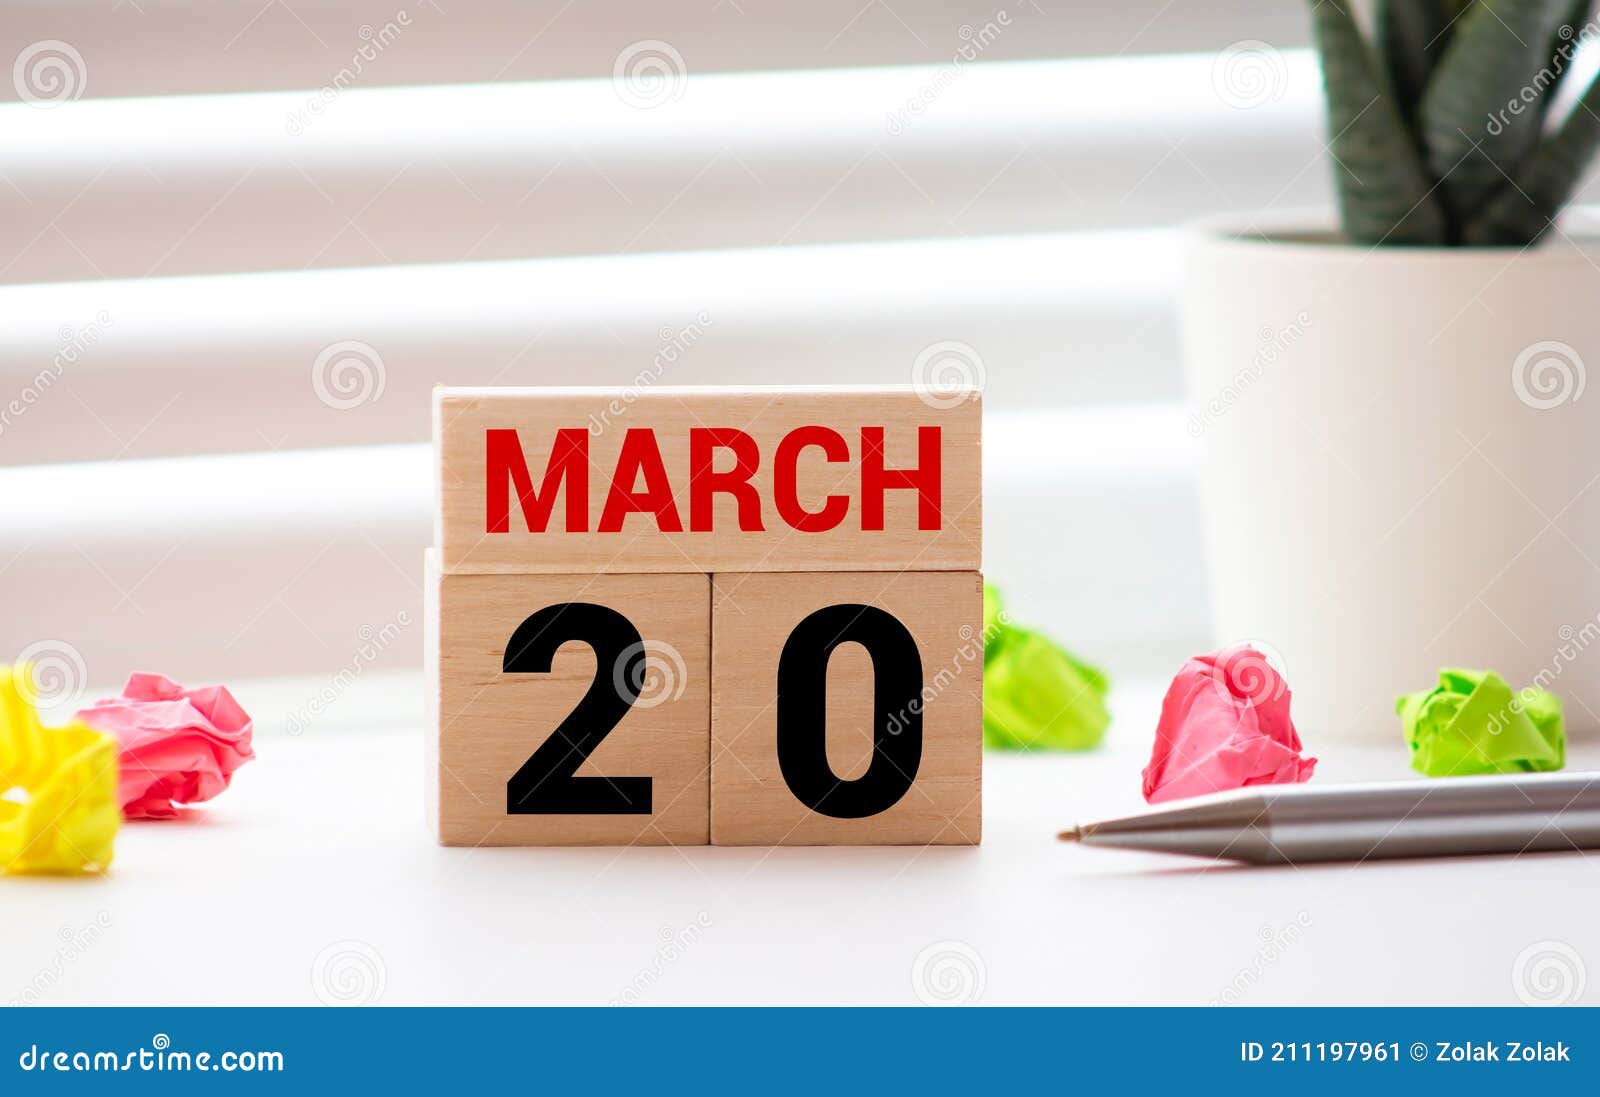 March 20 Written With Wooden Blocks Stock Image Image Of Concept